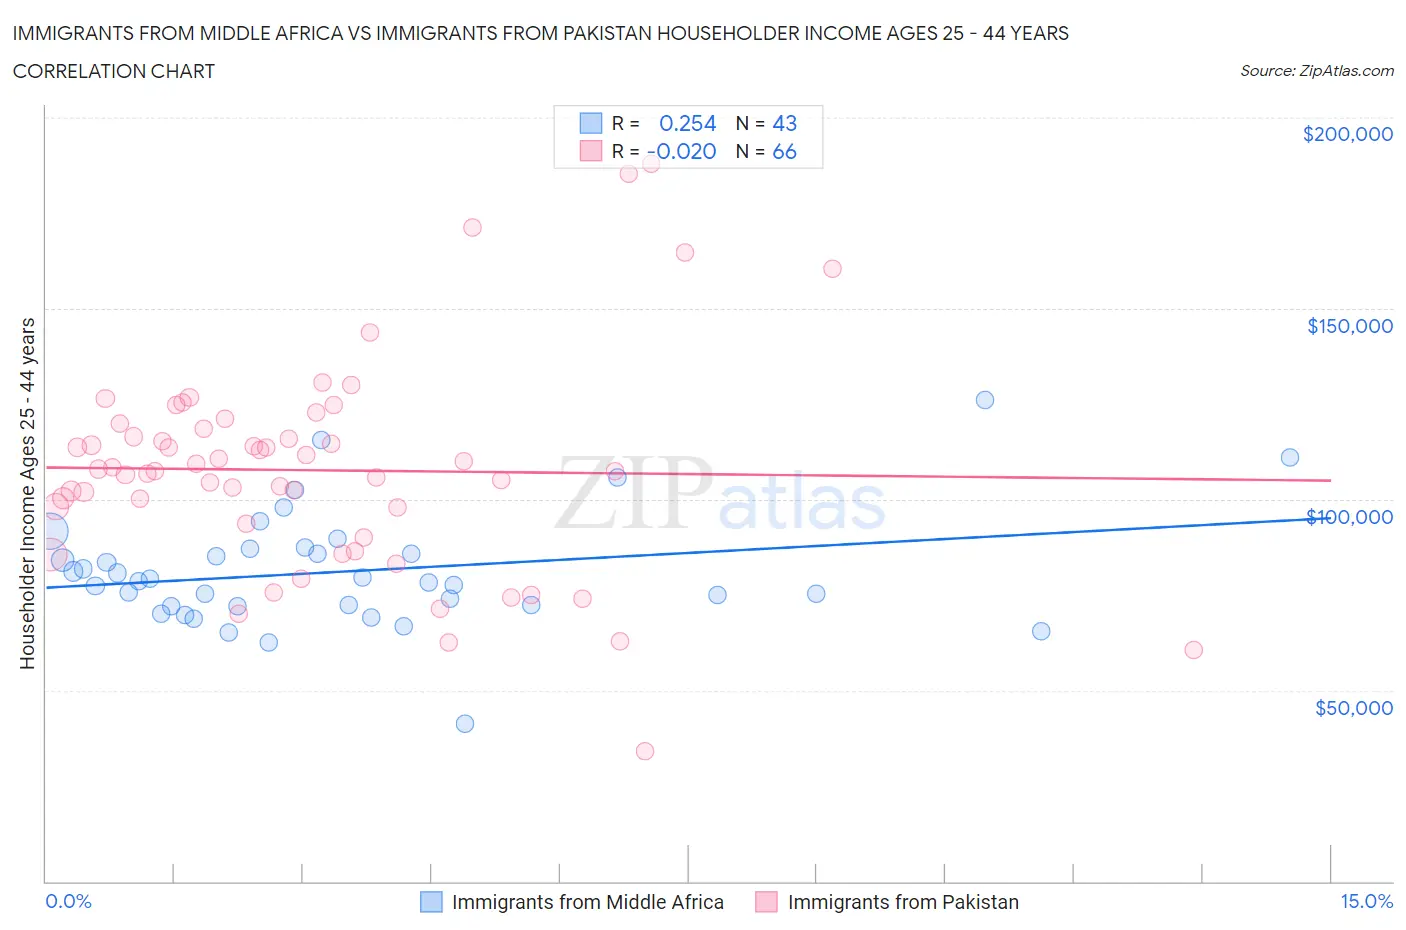 Immigrants from Middle Africa vs Immigrants from Pakistan Householder Income Ages 25 - 44 years